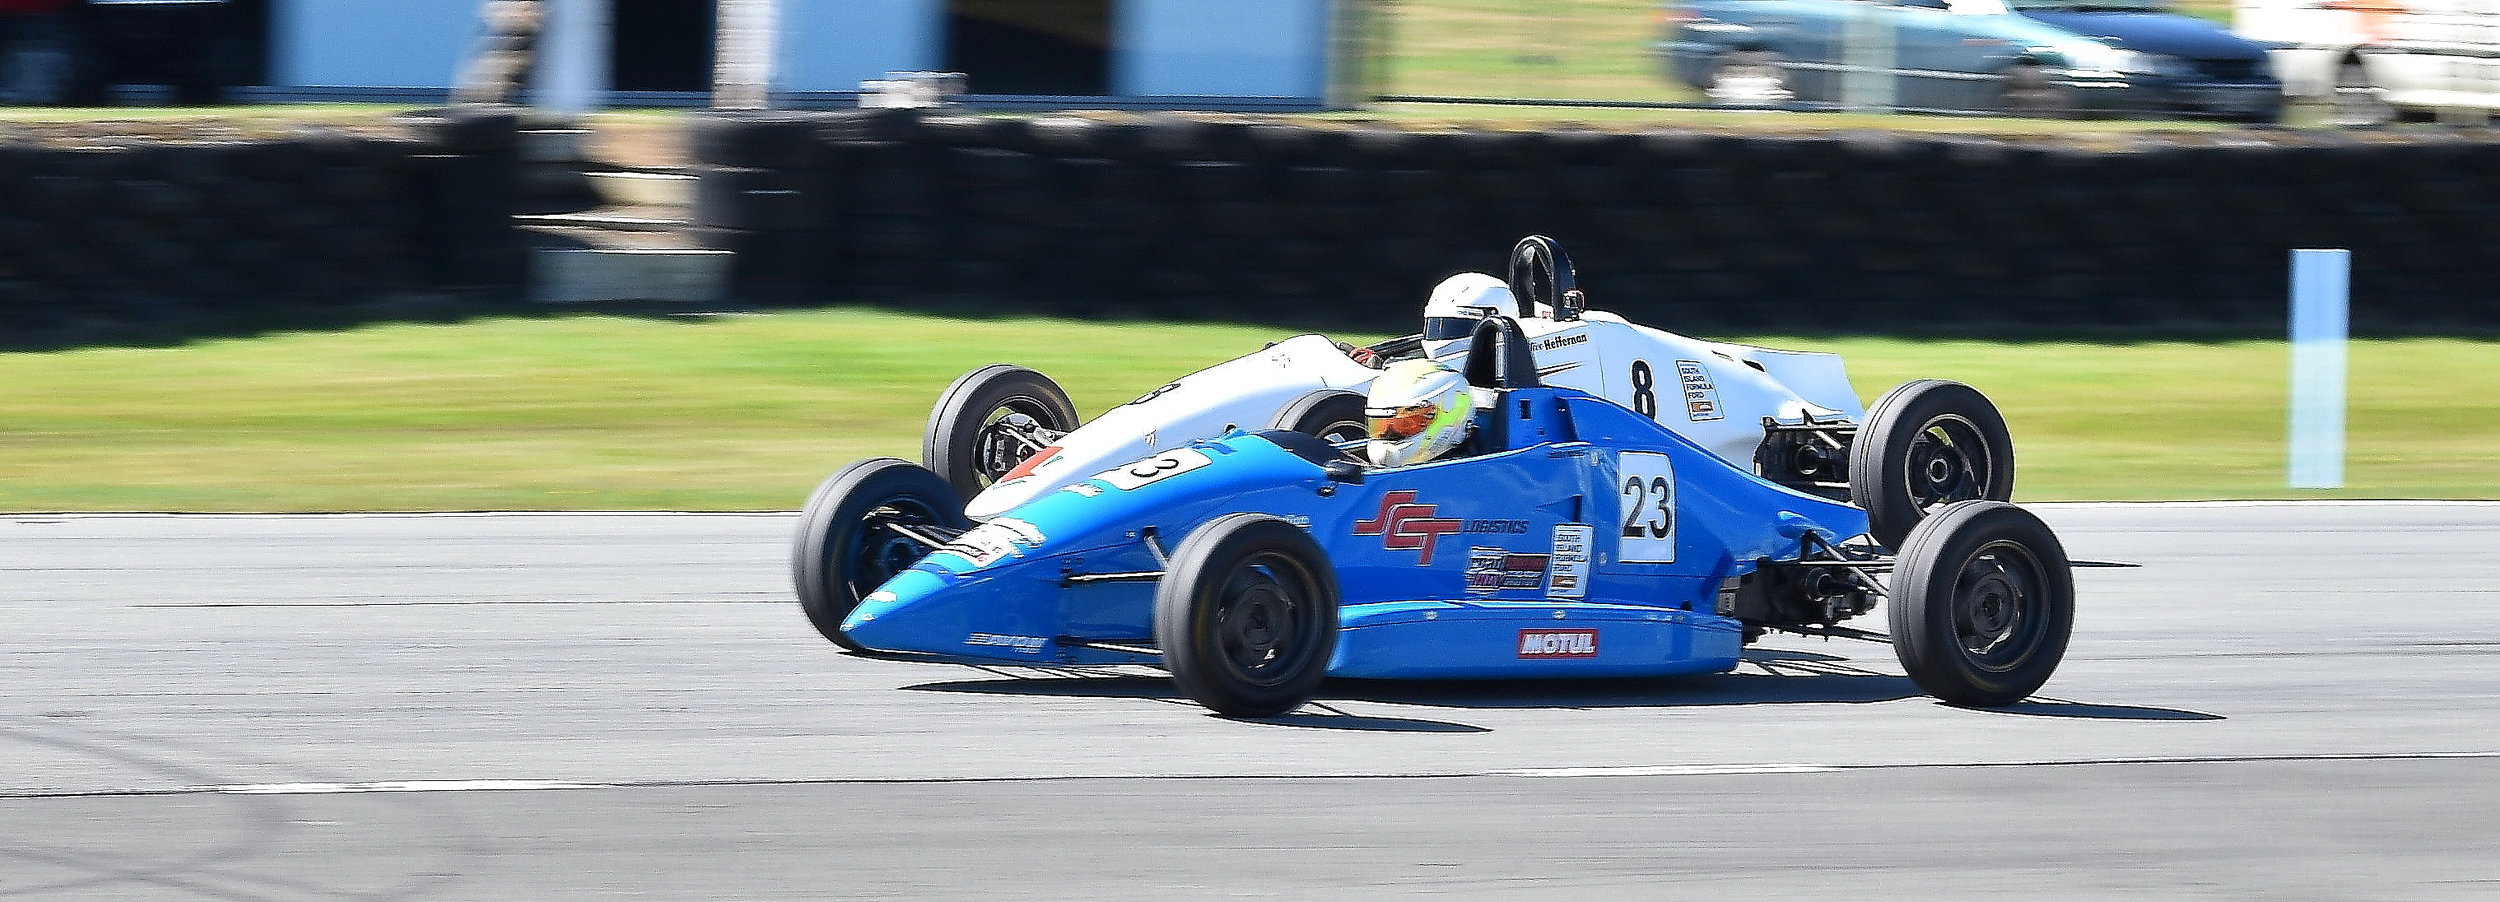  Invercargill drivers Jordan Michels in his Mygale FF battled Steve Heffernan in his Formula Ford all weekend with Michels the victor 